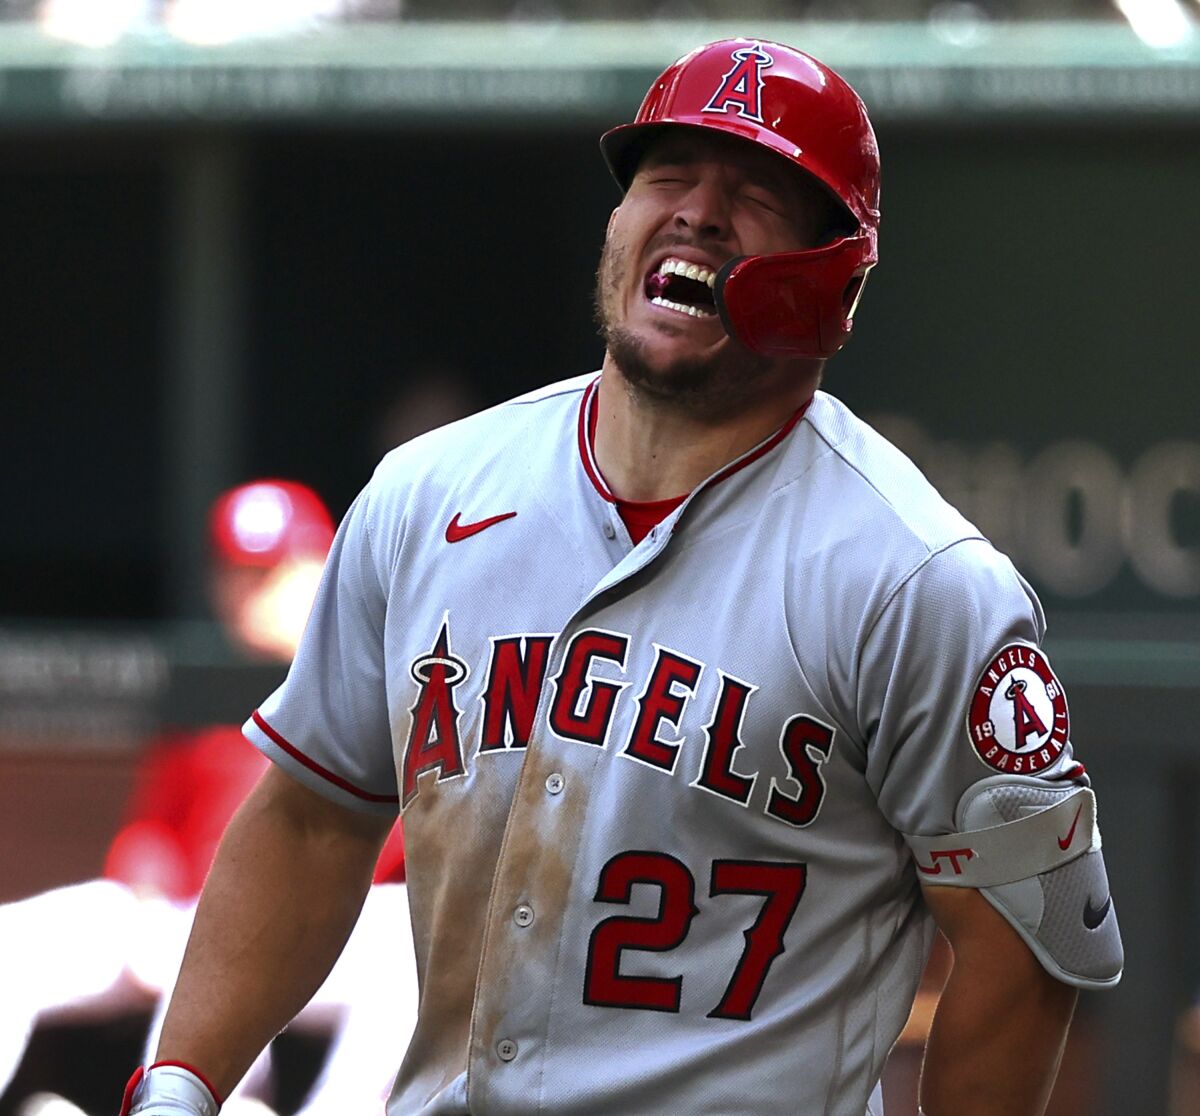 Angels star Mike Trout reacts after being hit by a pitch in the fifth inning in an 8-3 win over the Texas Rangers.